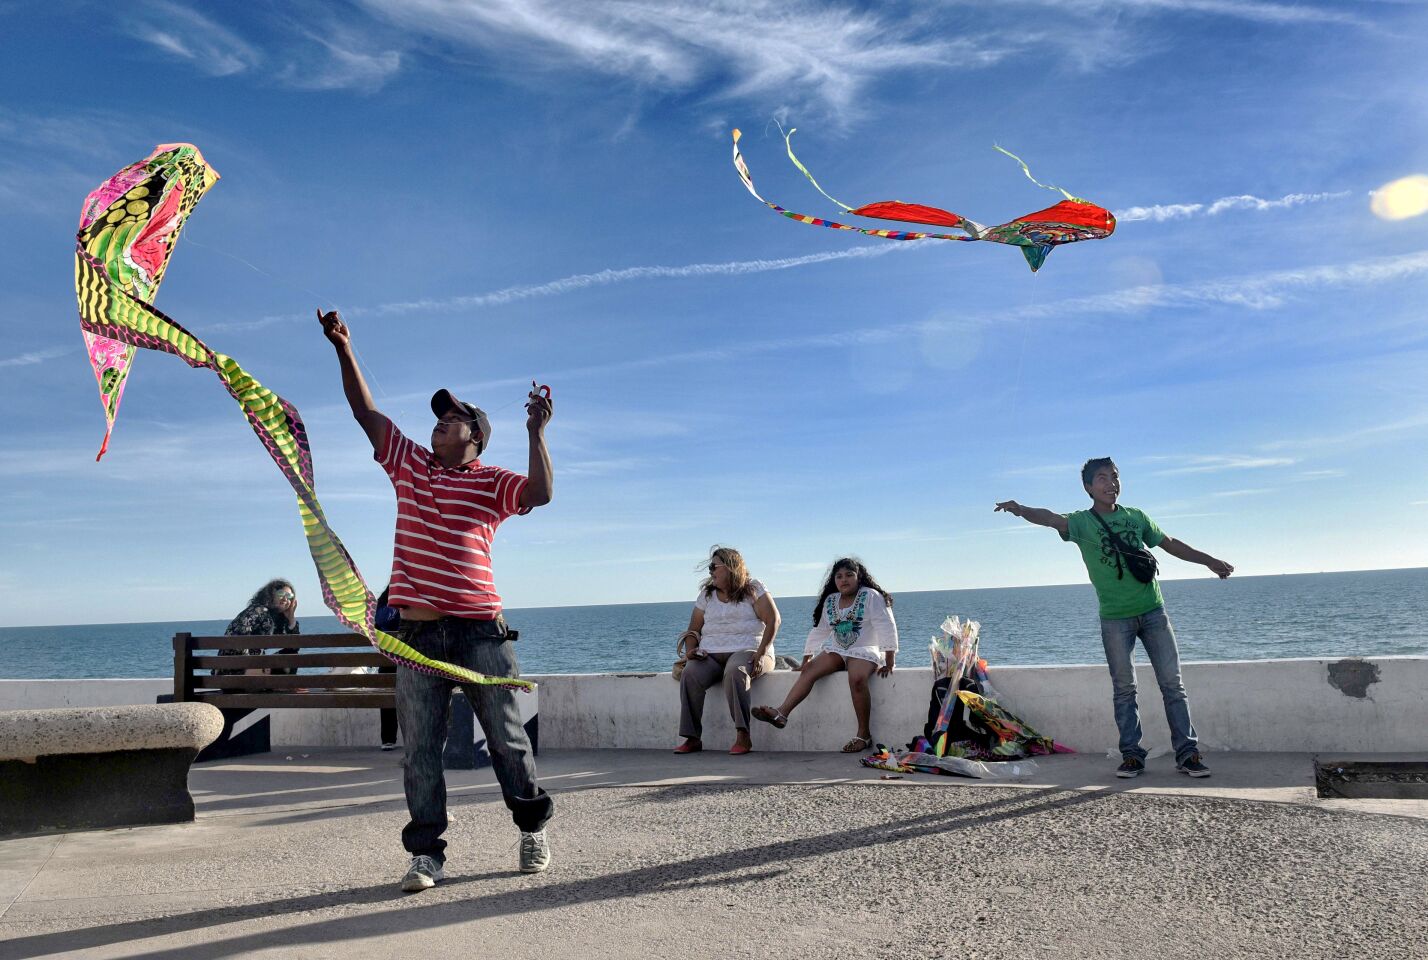 People fly kites along the malecon in Puerto Peñasco, Sonora state, Mexico.